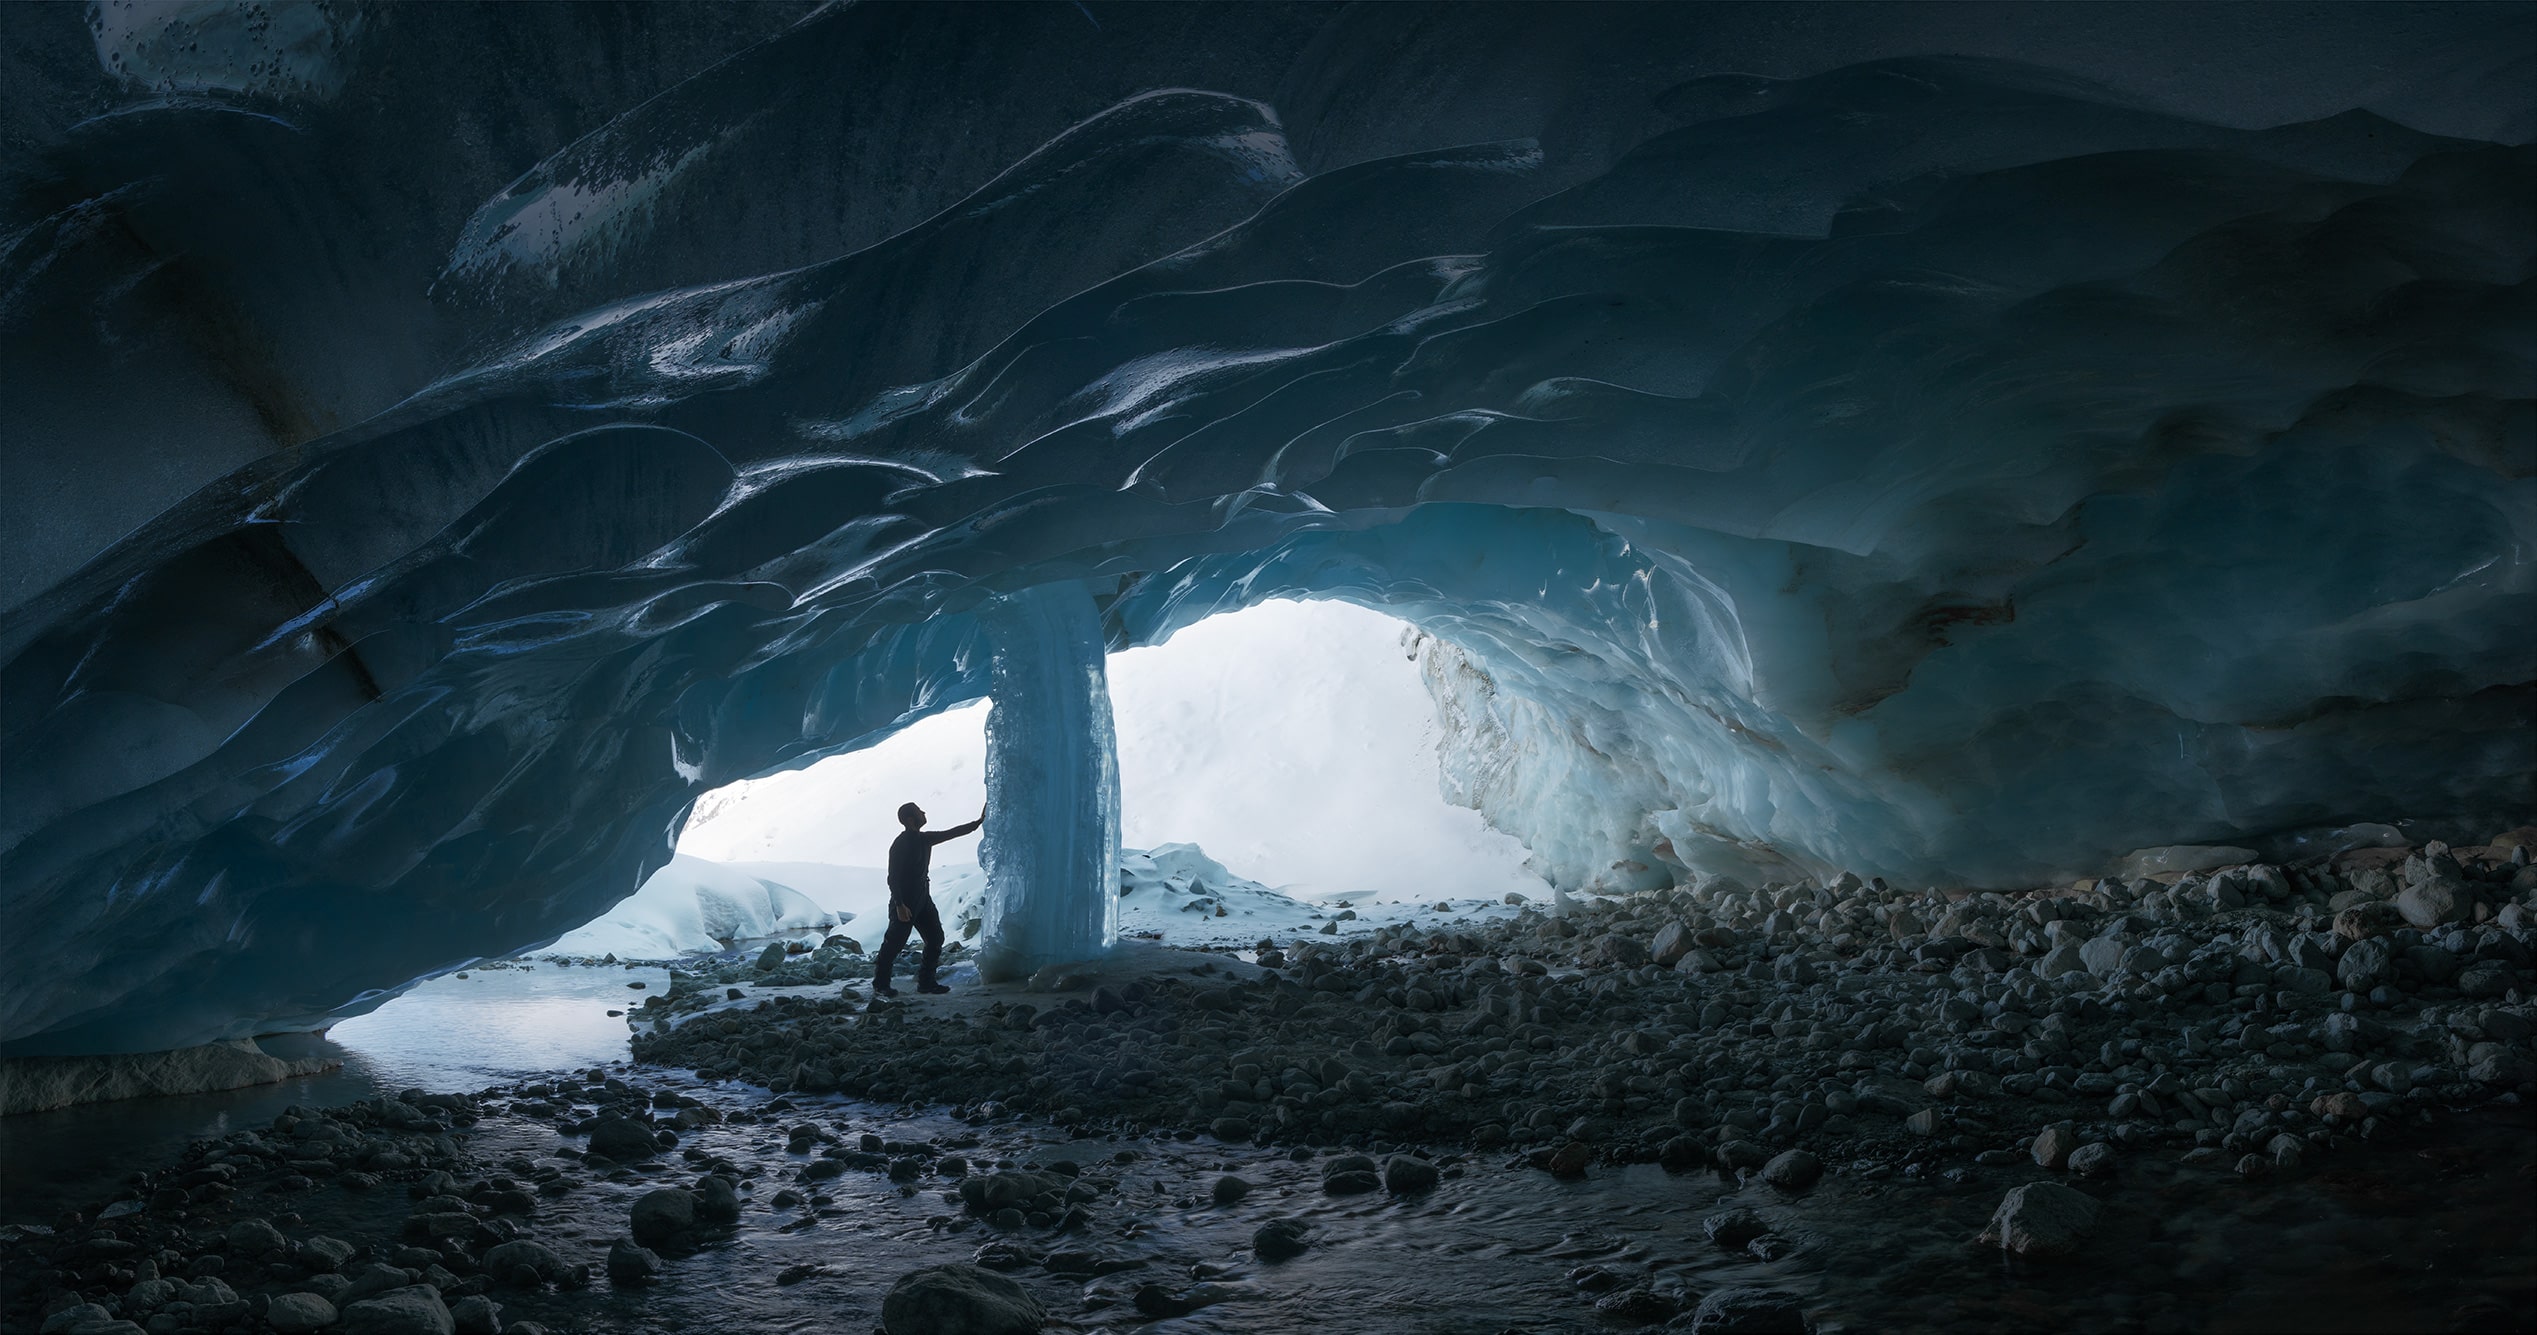 Discover this photography panorama of the Zinal Glacier Ice Cave nestled in the picturesque Swiss Alps. Captured with skill and precision by acclaimed photographer Jennifer Esseiva using her Nikon Z8, this epic landscape photography showcases the dramatic beauty of this natural wonder. Prepare to be enchanted by the captivating vistas and intricate details of this awe-inspiring scenery.